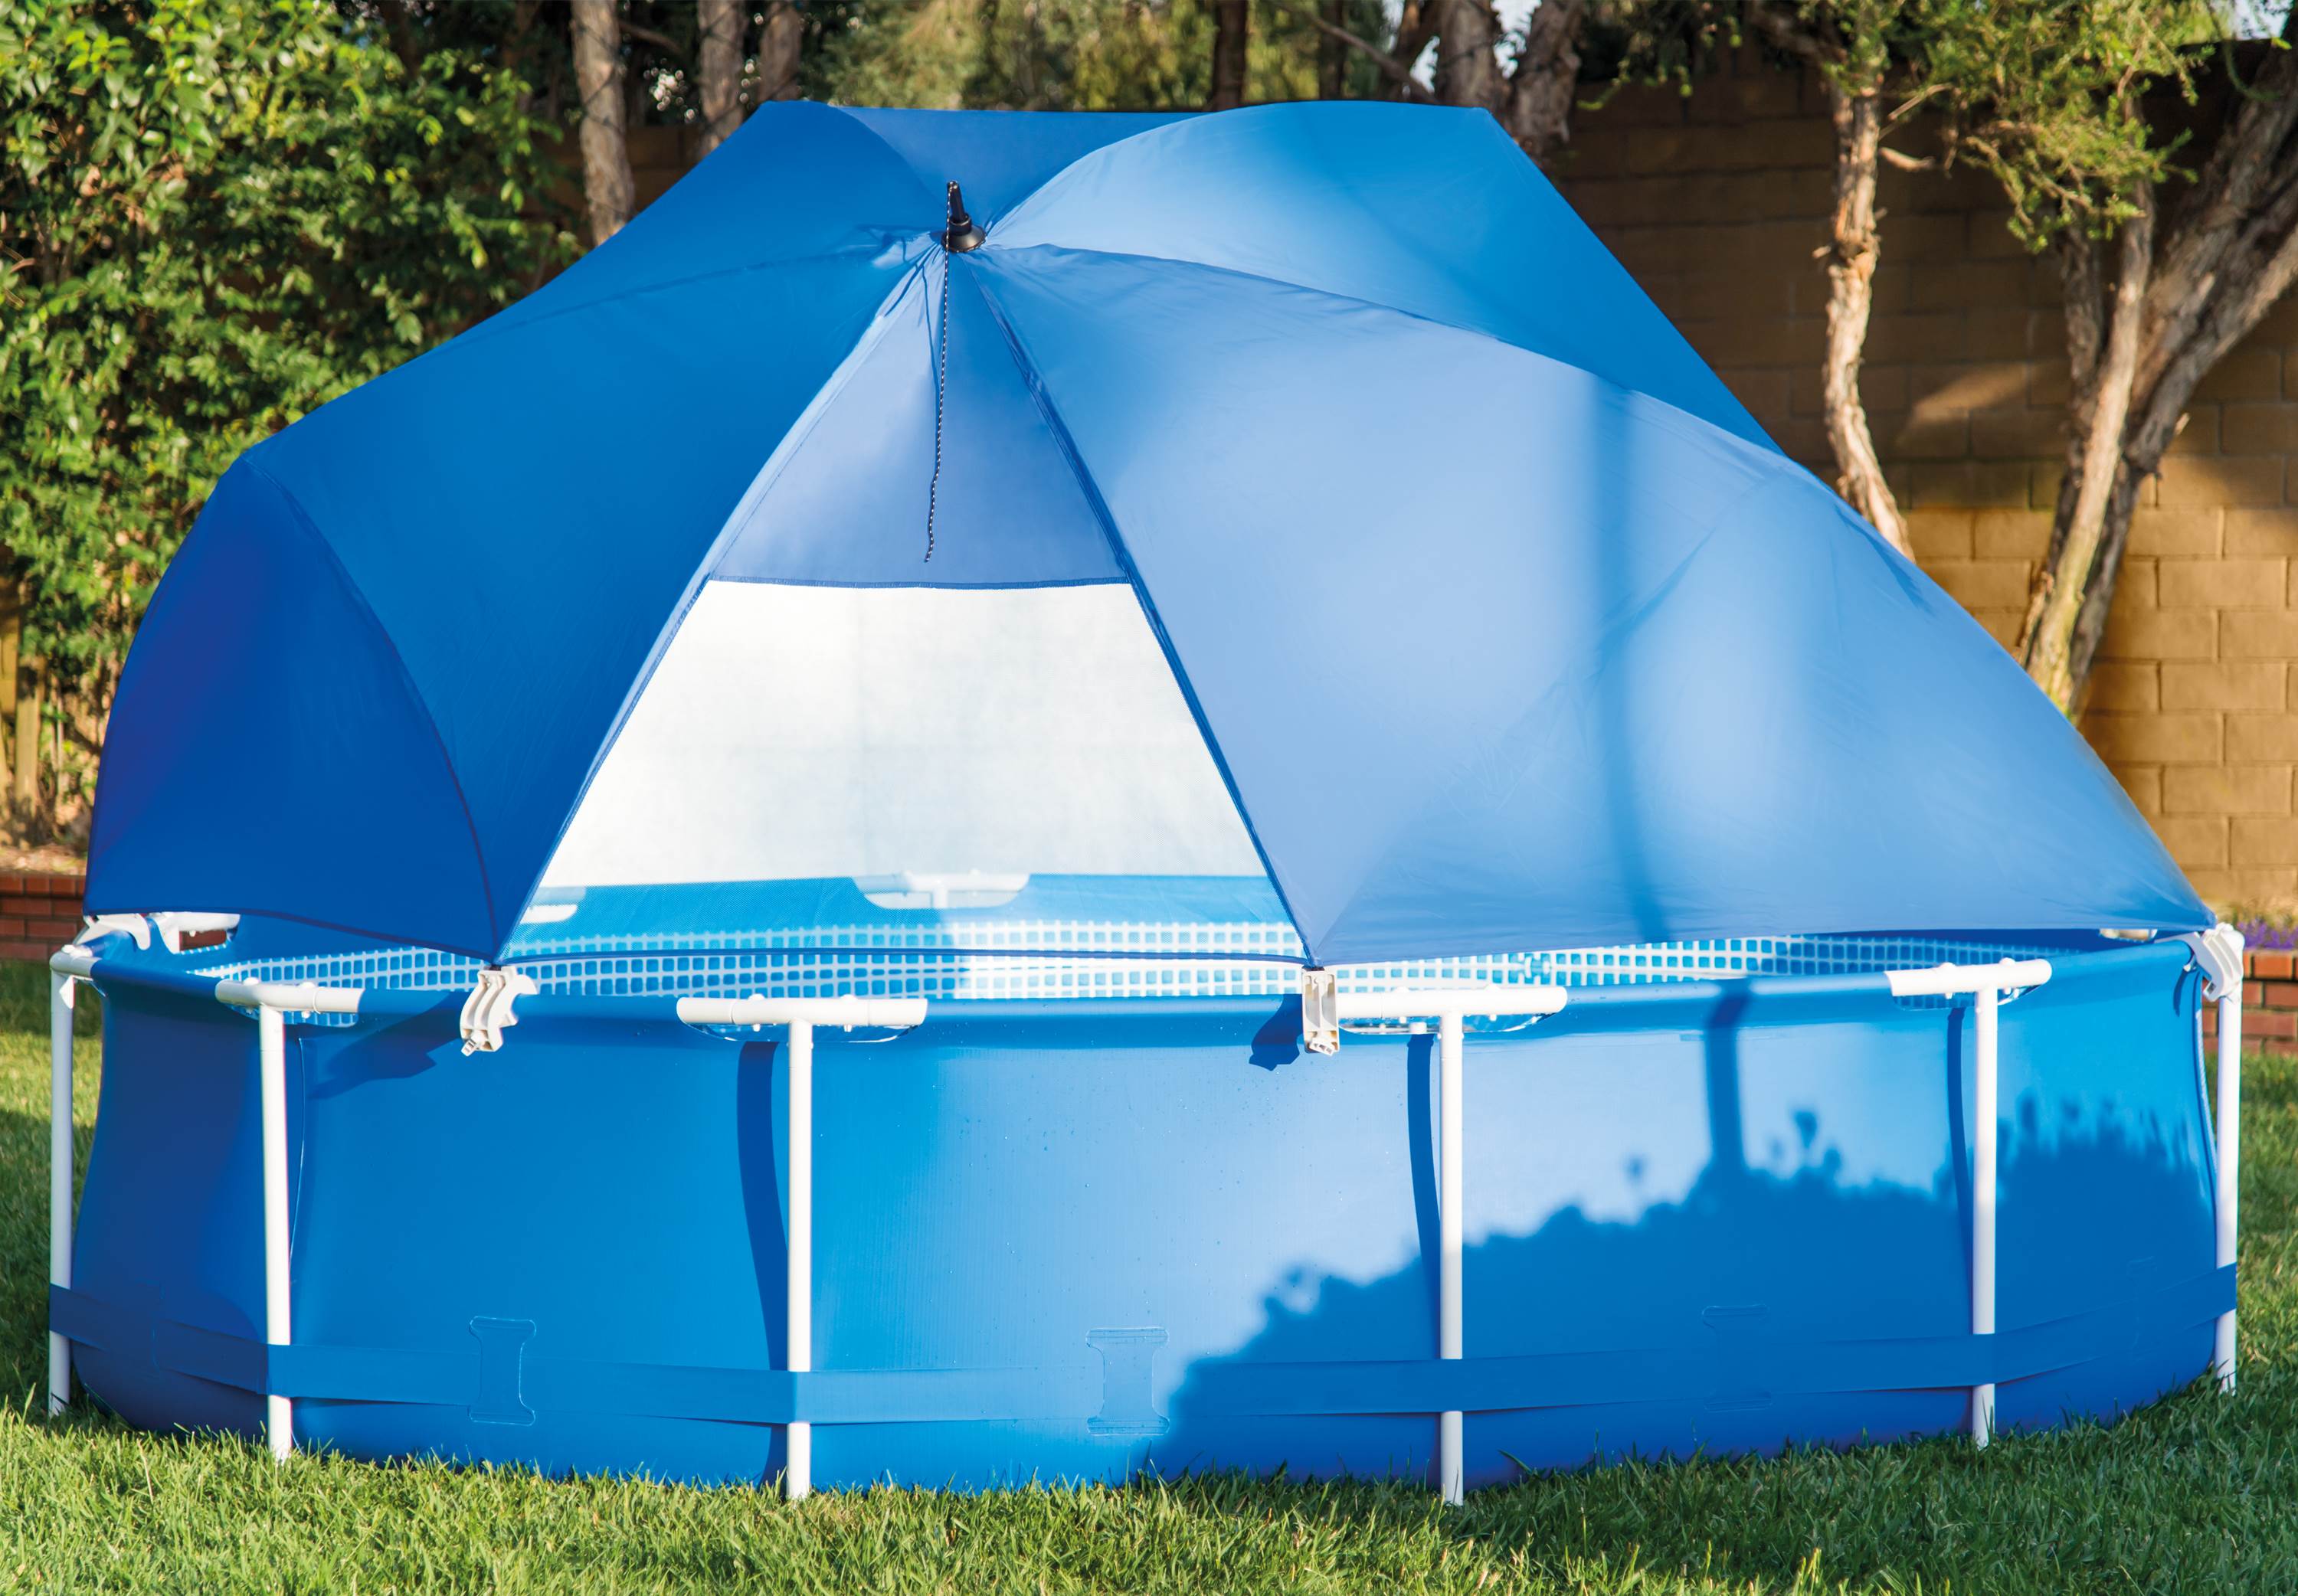 Intex Pool Canopy for 12-18' Above-Ground Round Metal Frame and Ultra Frame  Pools